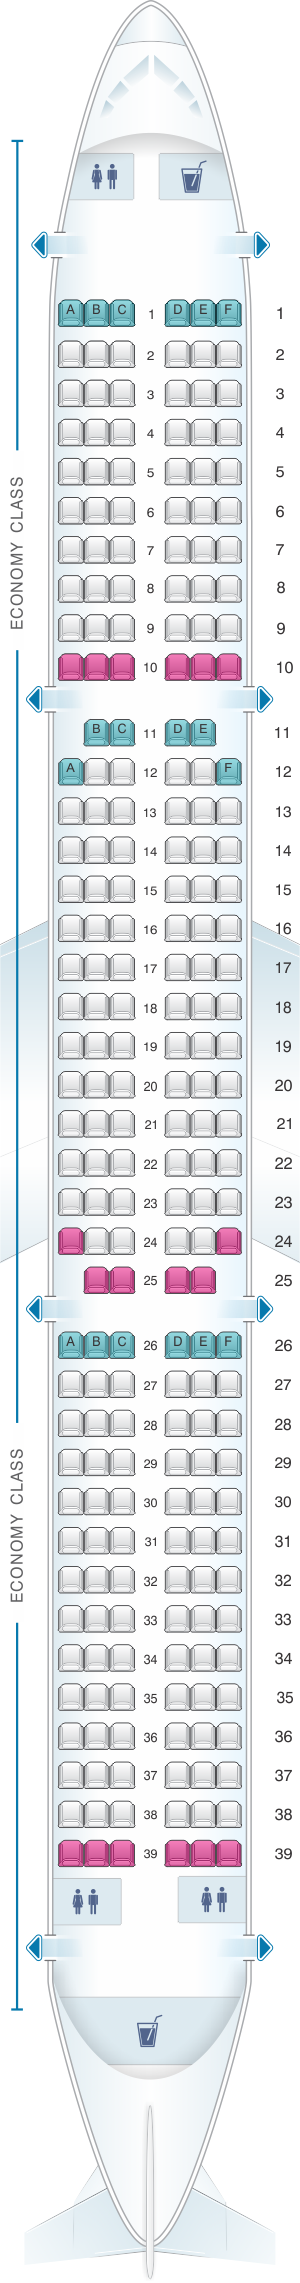 airplane seat map wizzair